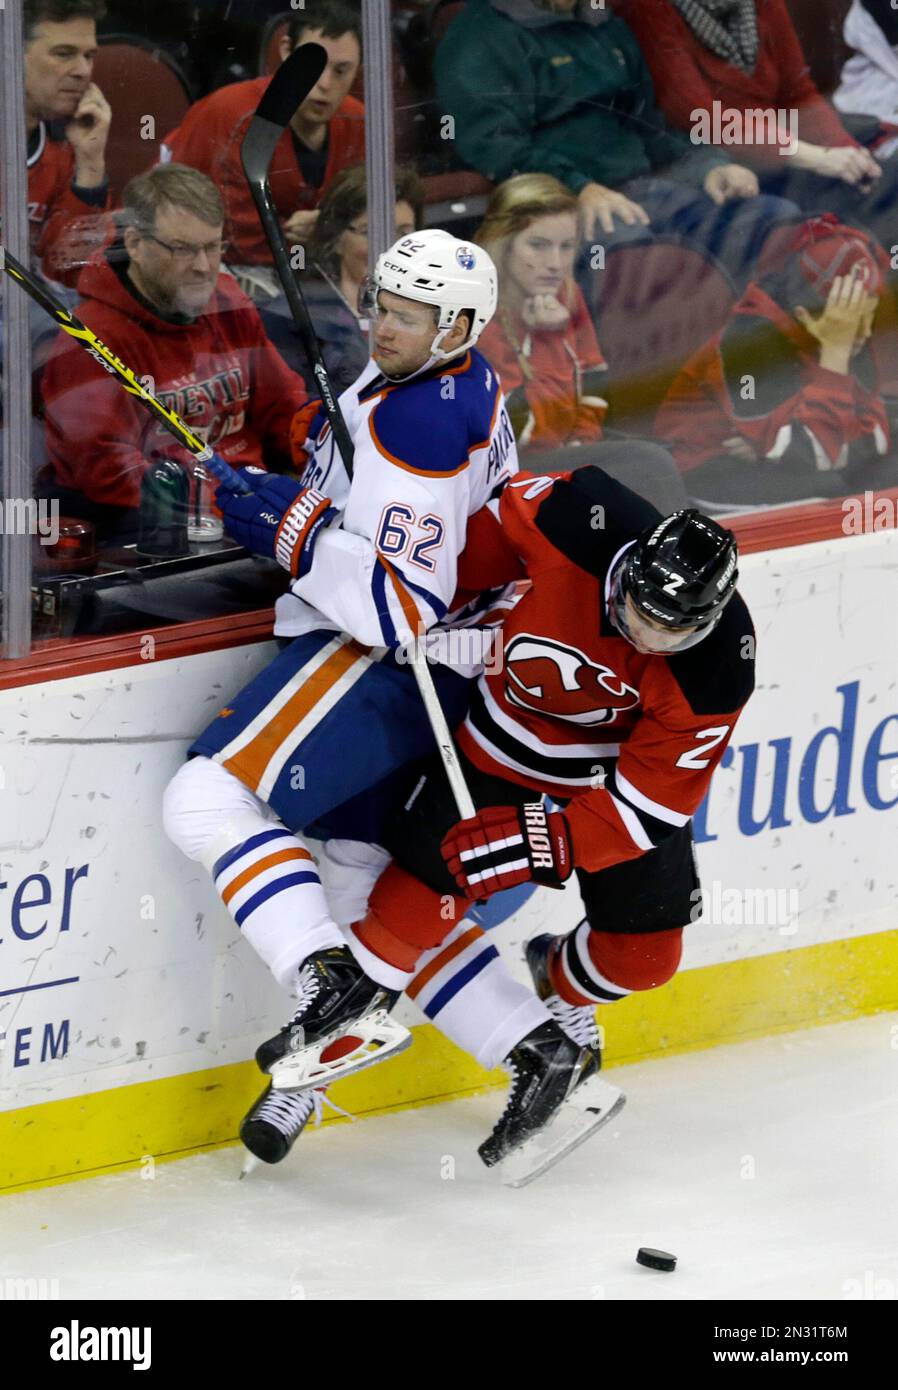 New Jersey Devils defenseman Marek Zidlicky (2), of the Czech Republic,  checks Edmonton Oilers right wing Iiro Pakarinen (62), of Finland, during  the third period of an NHL hockey game Monday, Feb.